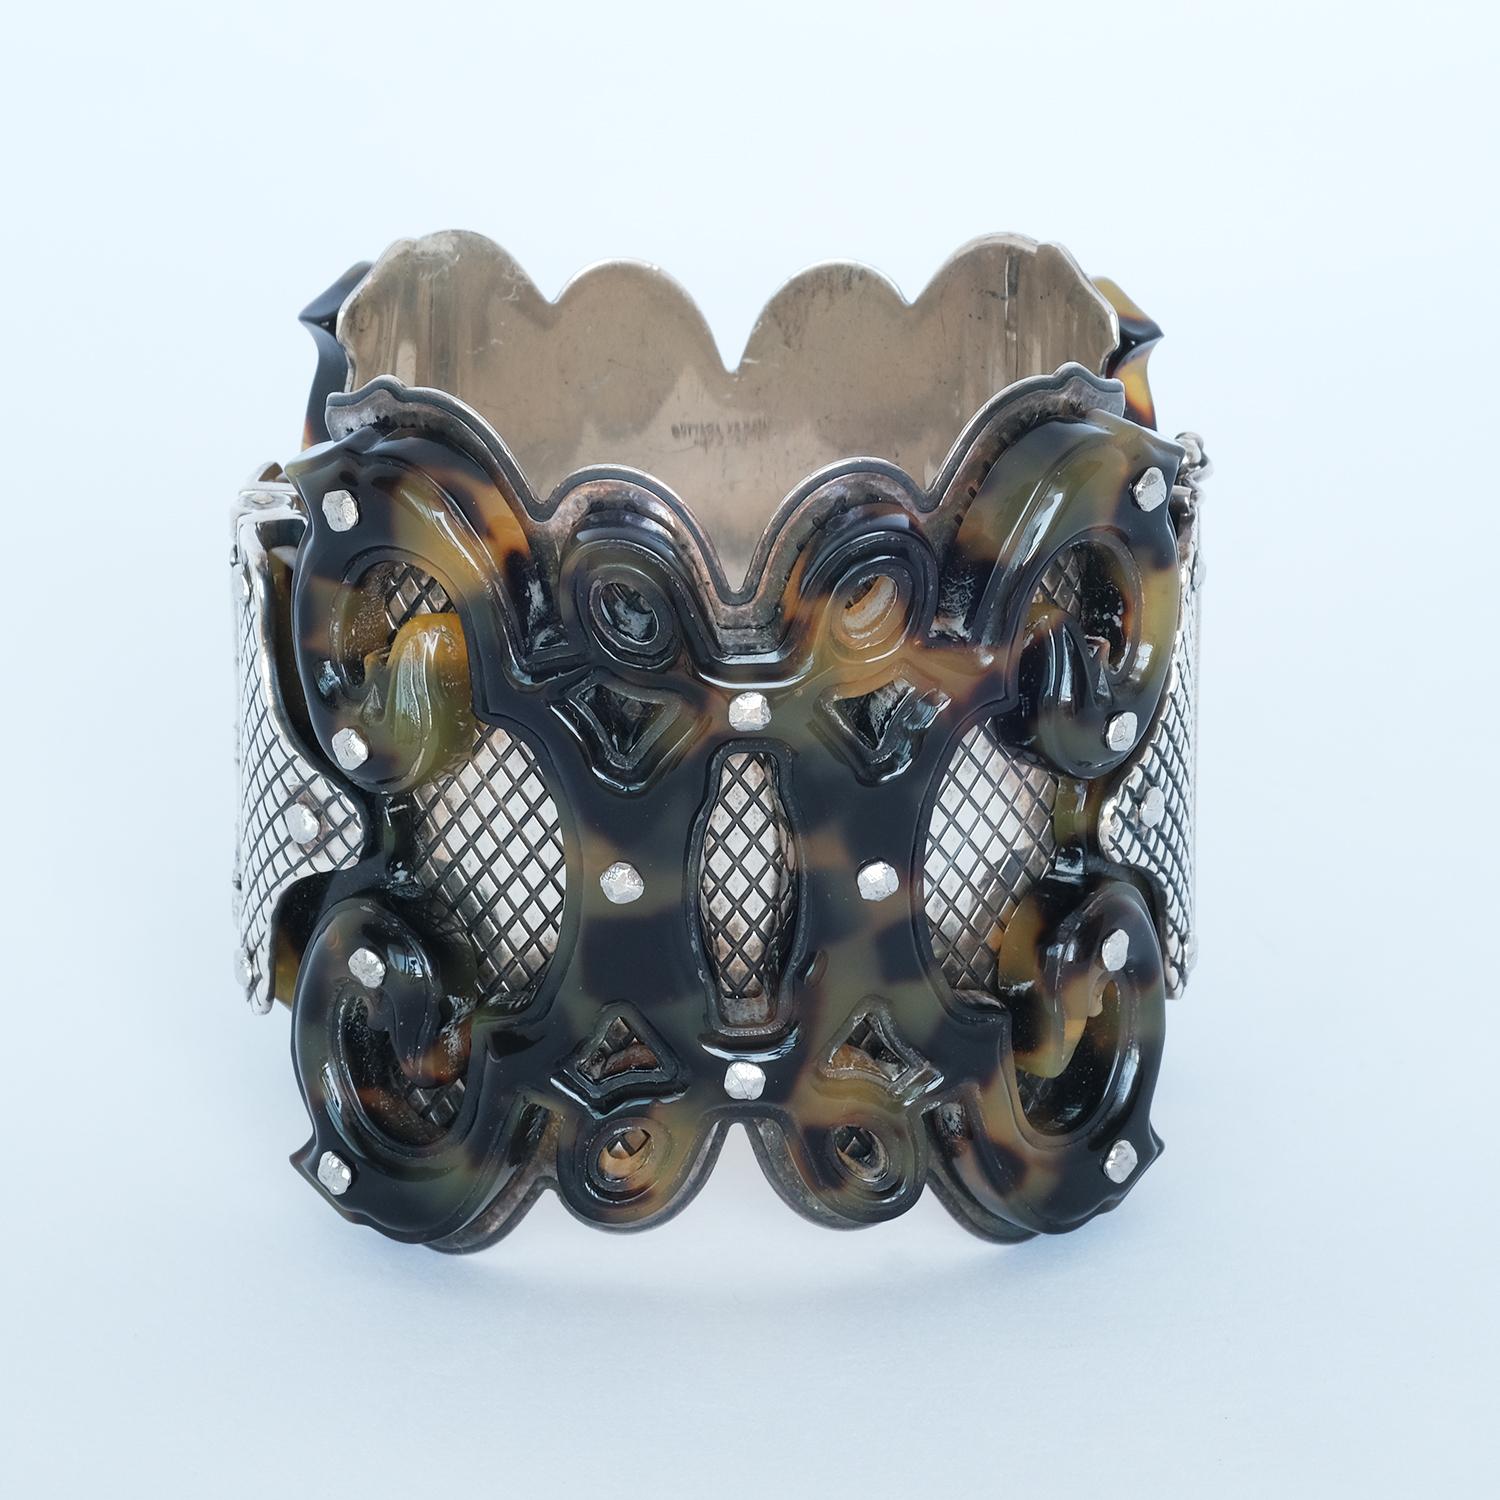 The base of this bangle is sterling silver, and upon the silver there is a beautiful layer of brown acrylic, formed in an ancient gothic style. The acrylic pattern is also nicely complemented by the metal nails attaching the acrylic to the silver